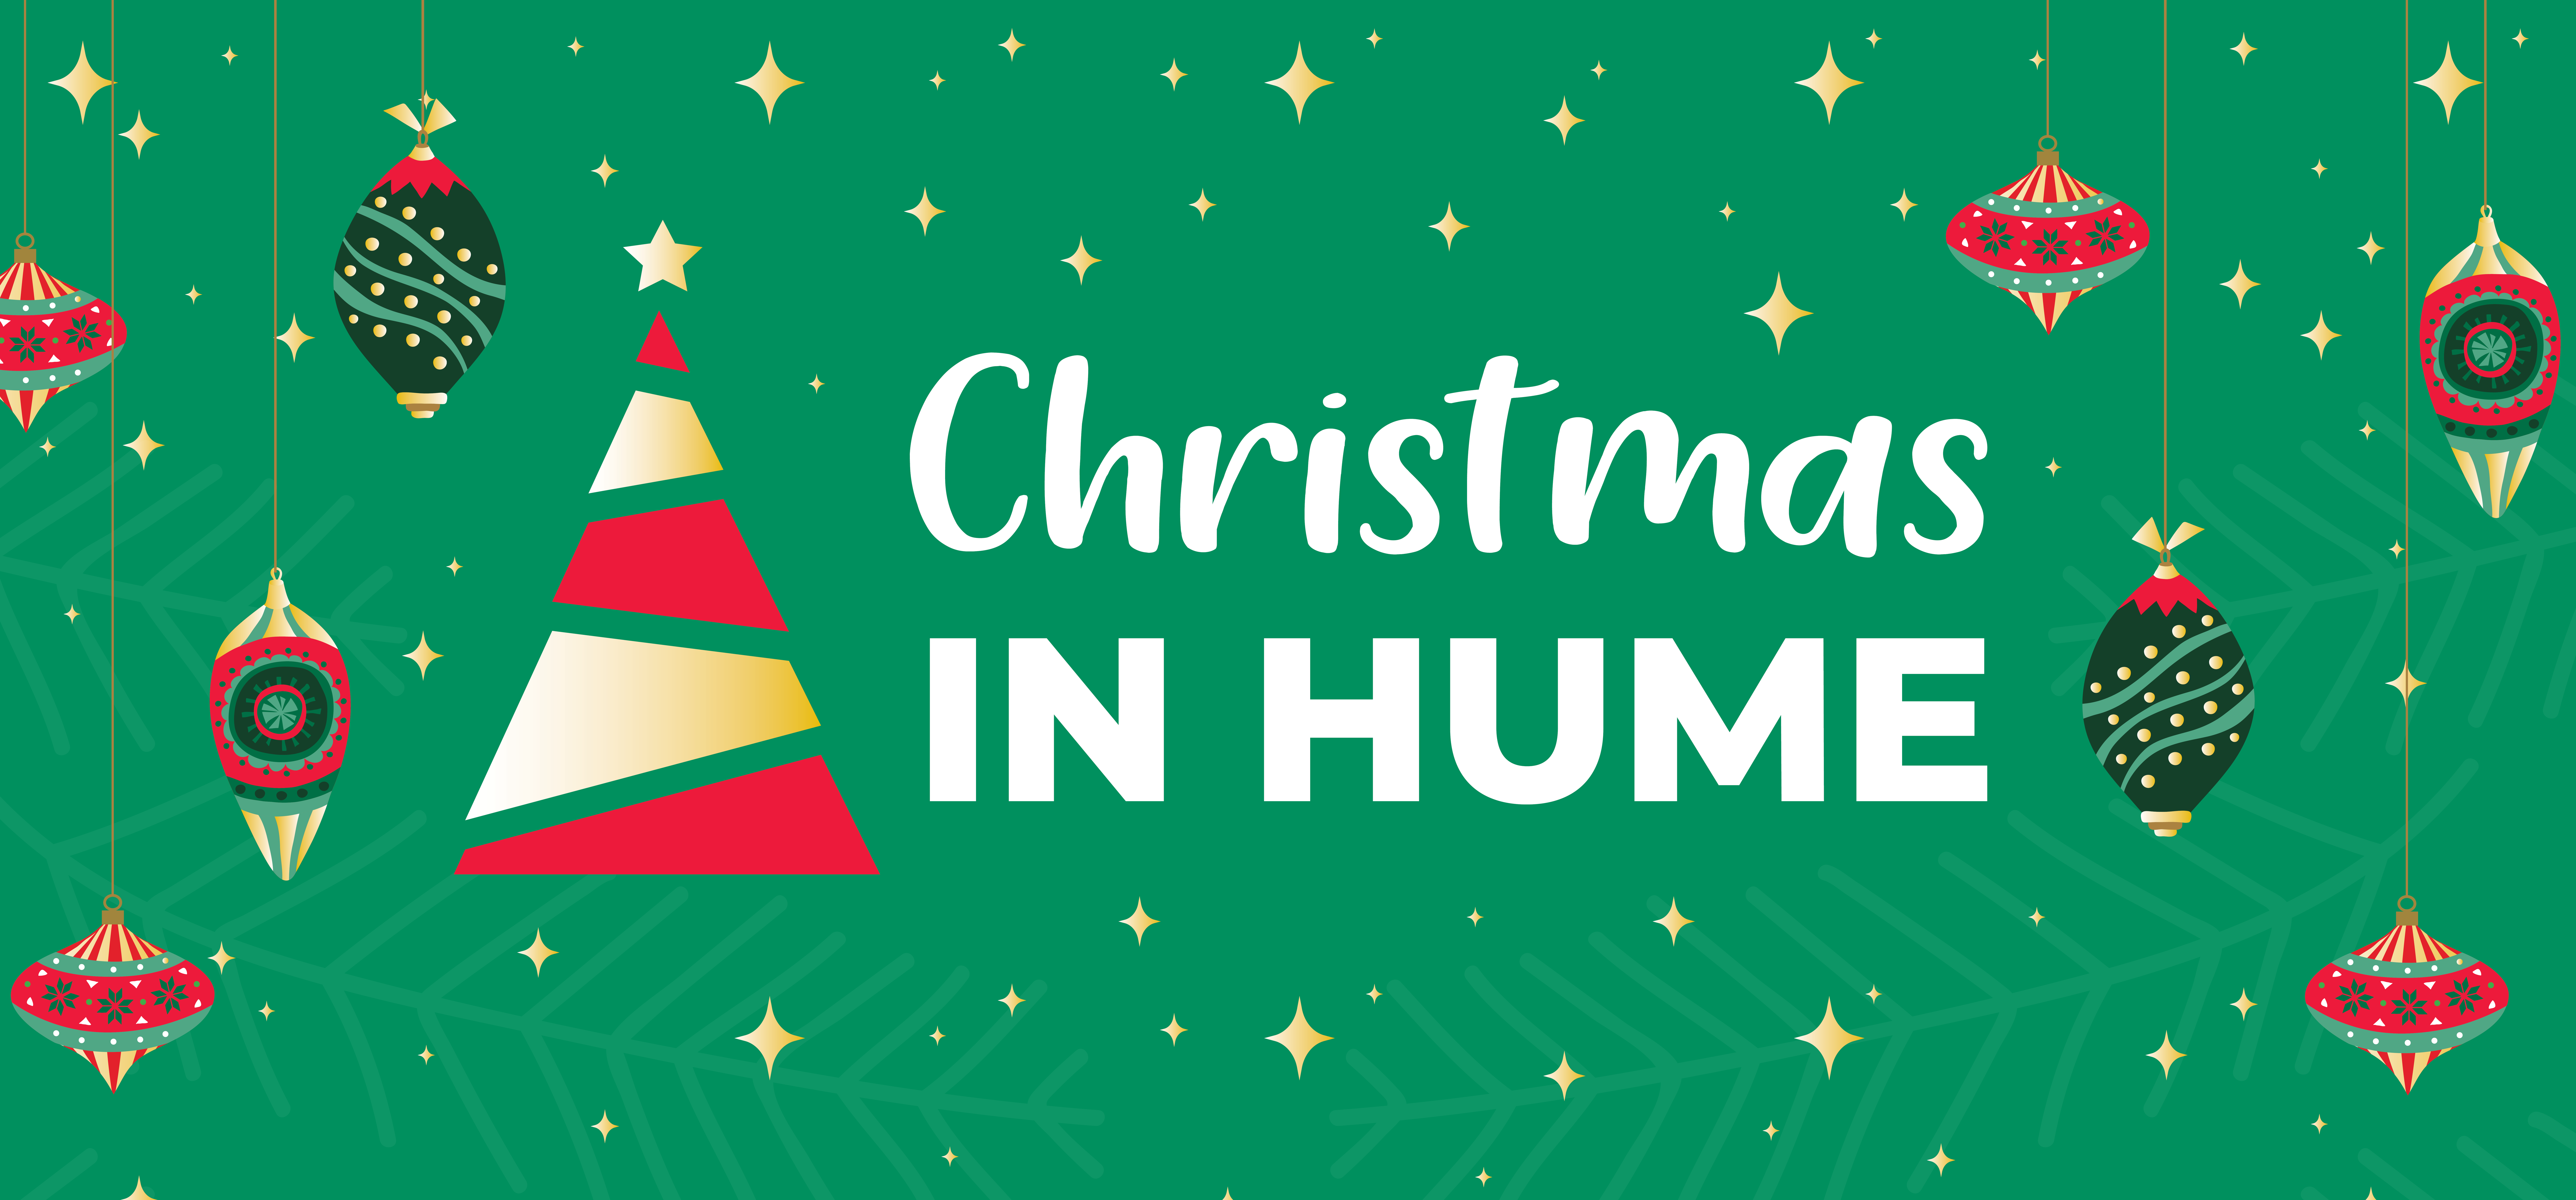 Christmas in Hume 2021 Website Landing Page 3800px x 1770px (002).png